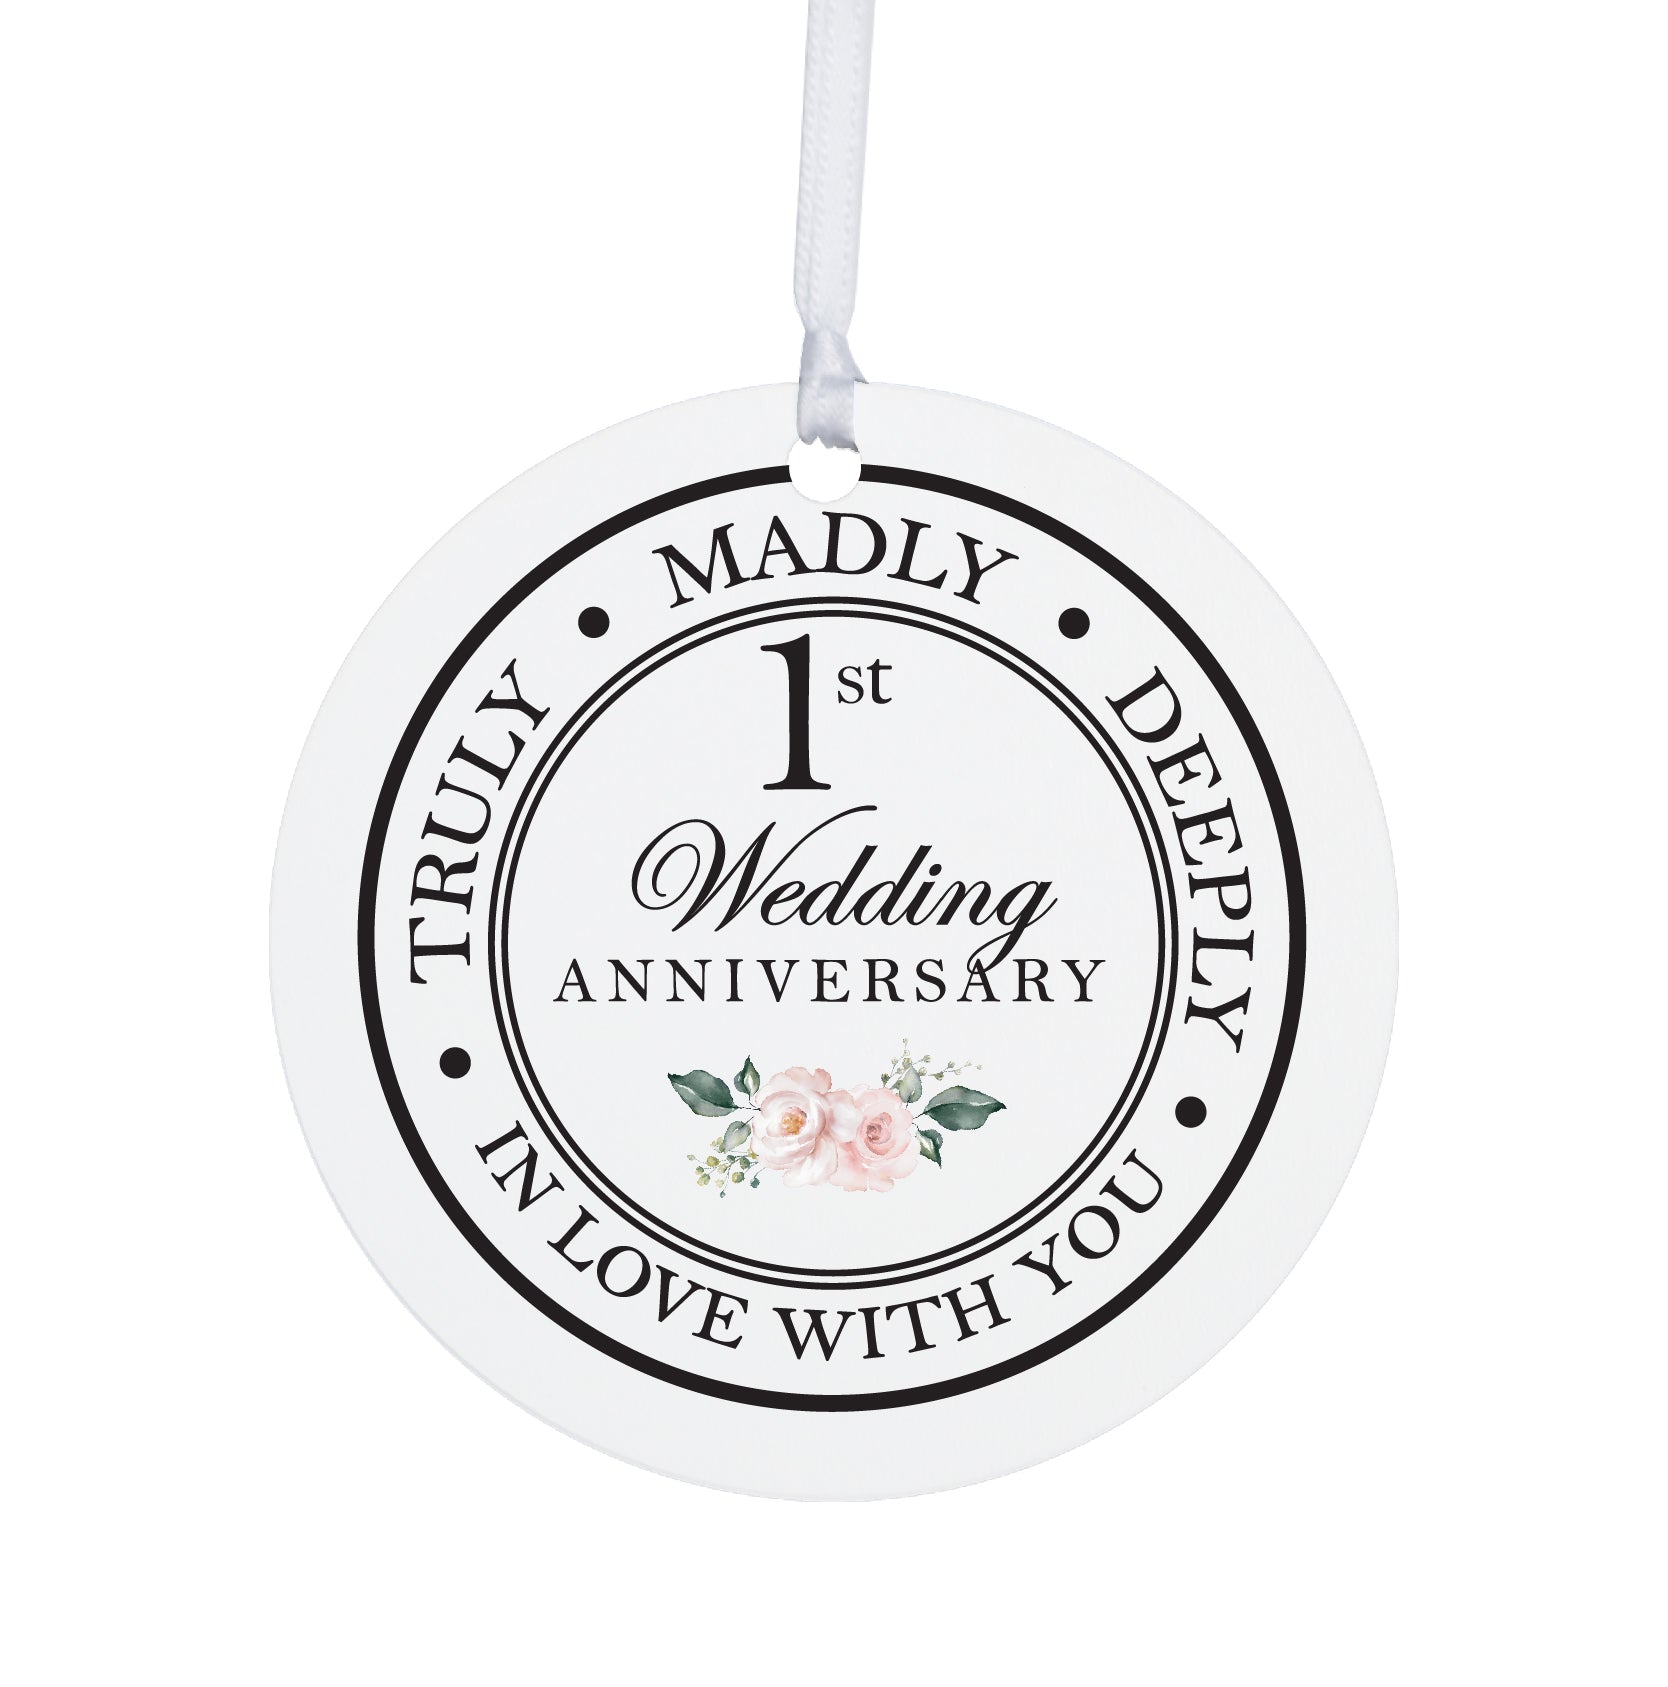 1st Wedding Anniversary White Ornament With Inspirational Message Gift Ideas - Truly, Madly, Deeply In Love With You